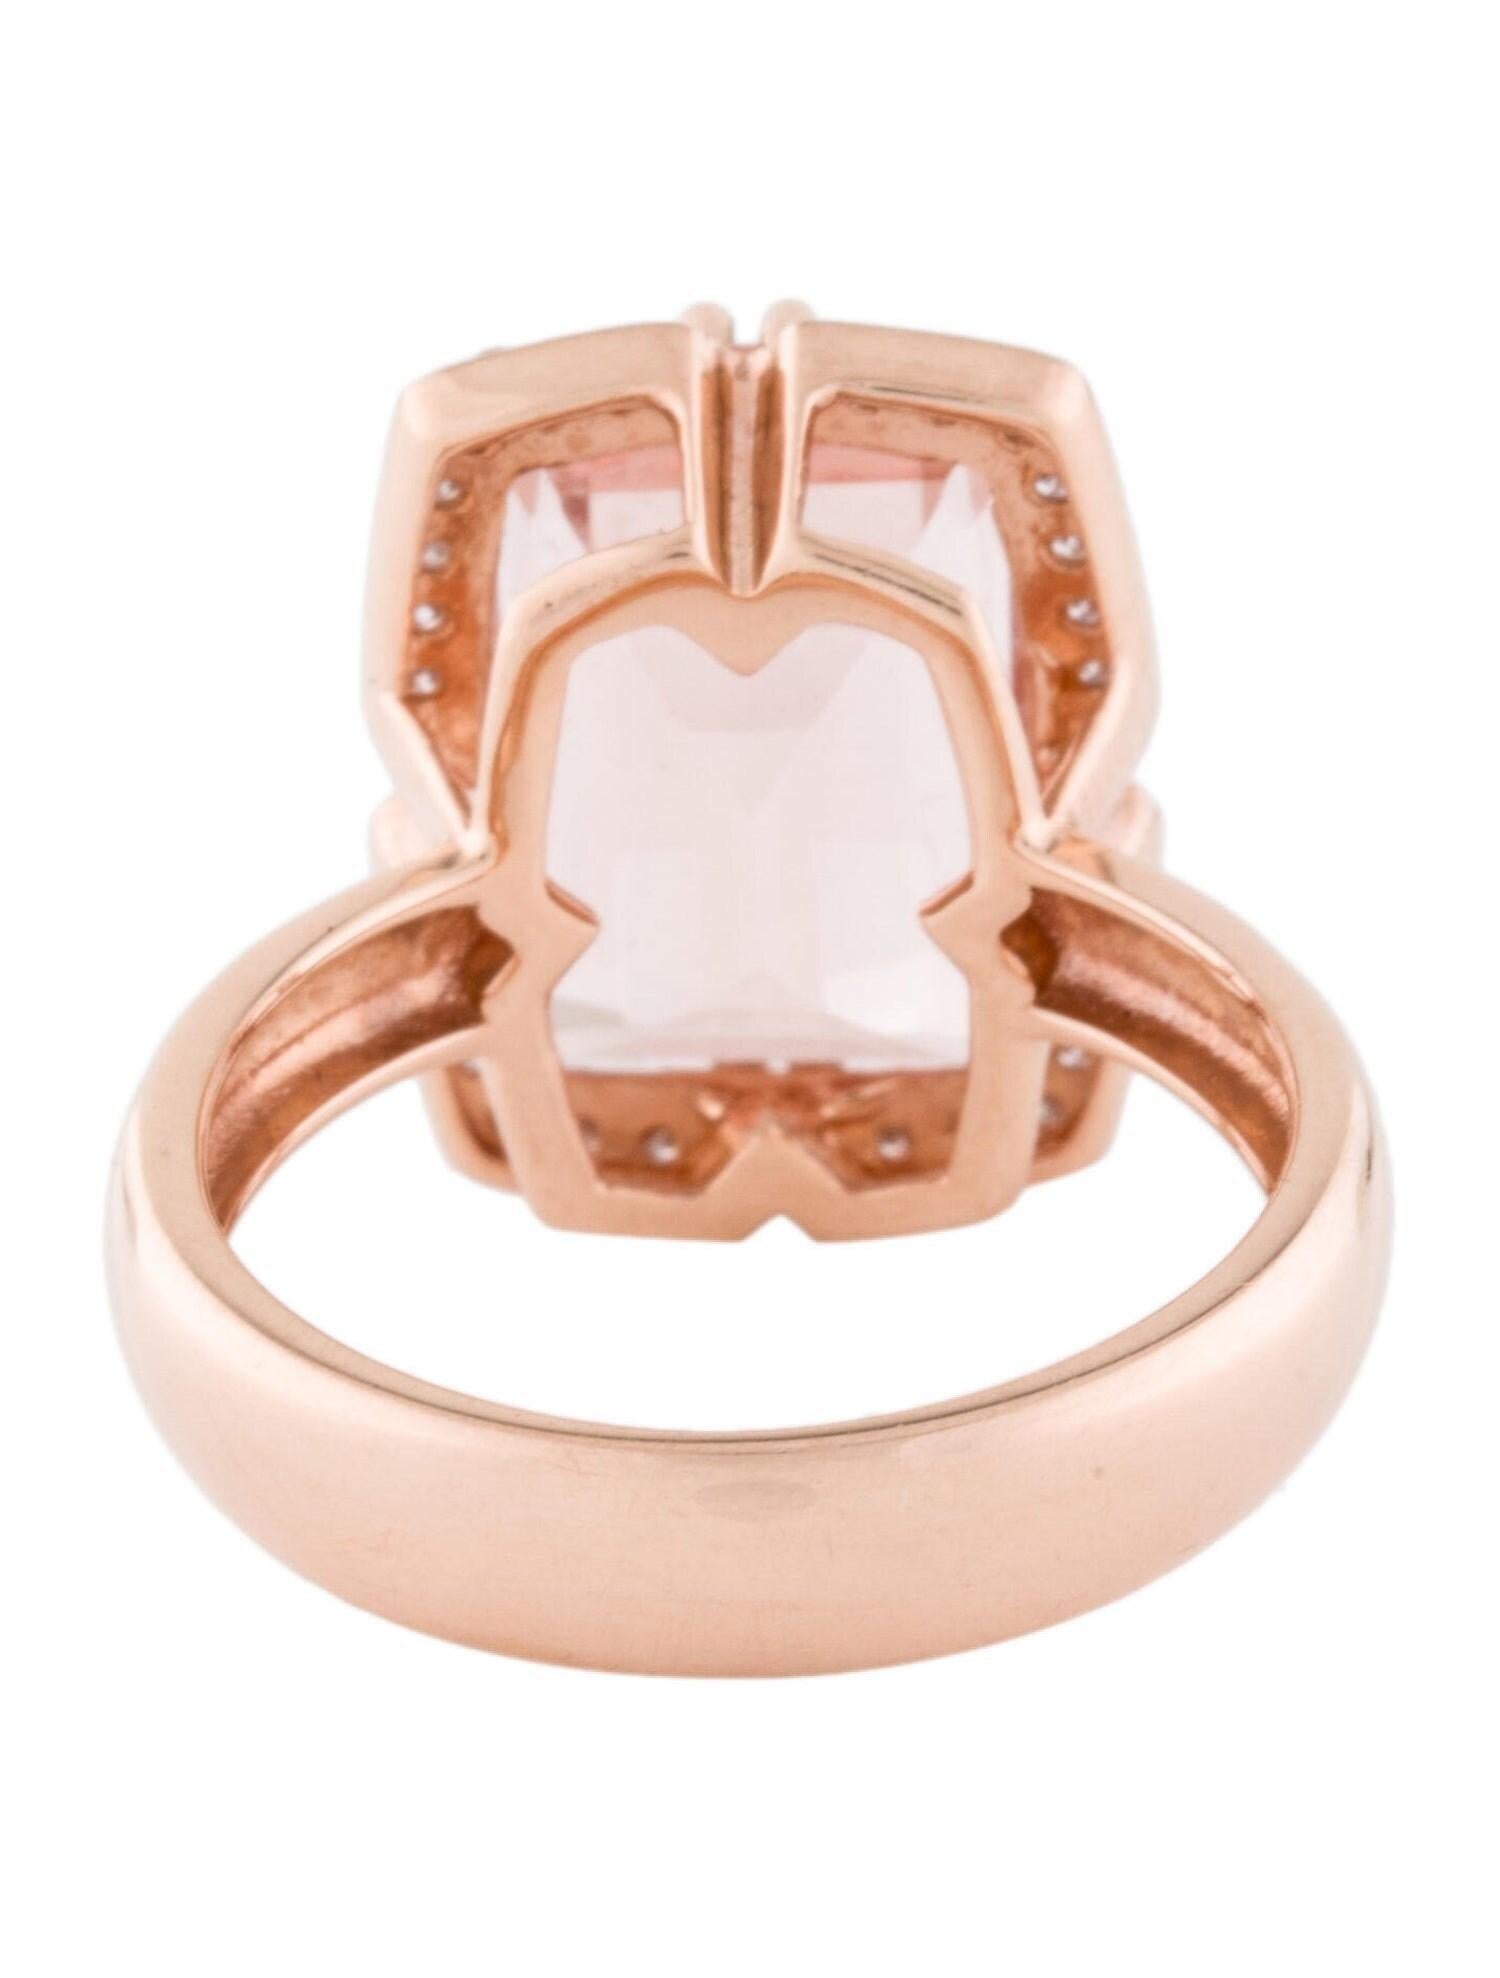 This is a magnificent morganite and diamond Emerald ring set in solid 14K rose gold. This morganite 6.71 Ct Emerald stone has an excellent peachy pink color (AAA quality gem) and is surrounded by a unique infinity style diamond halo. The ring is